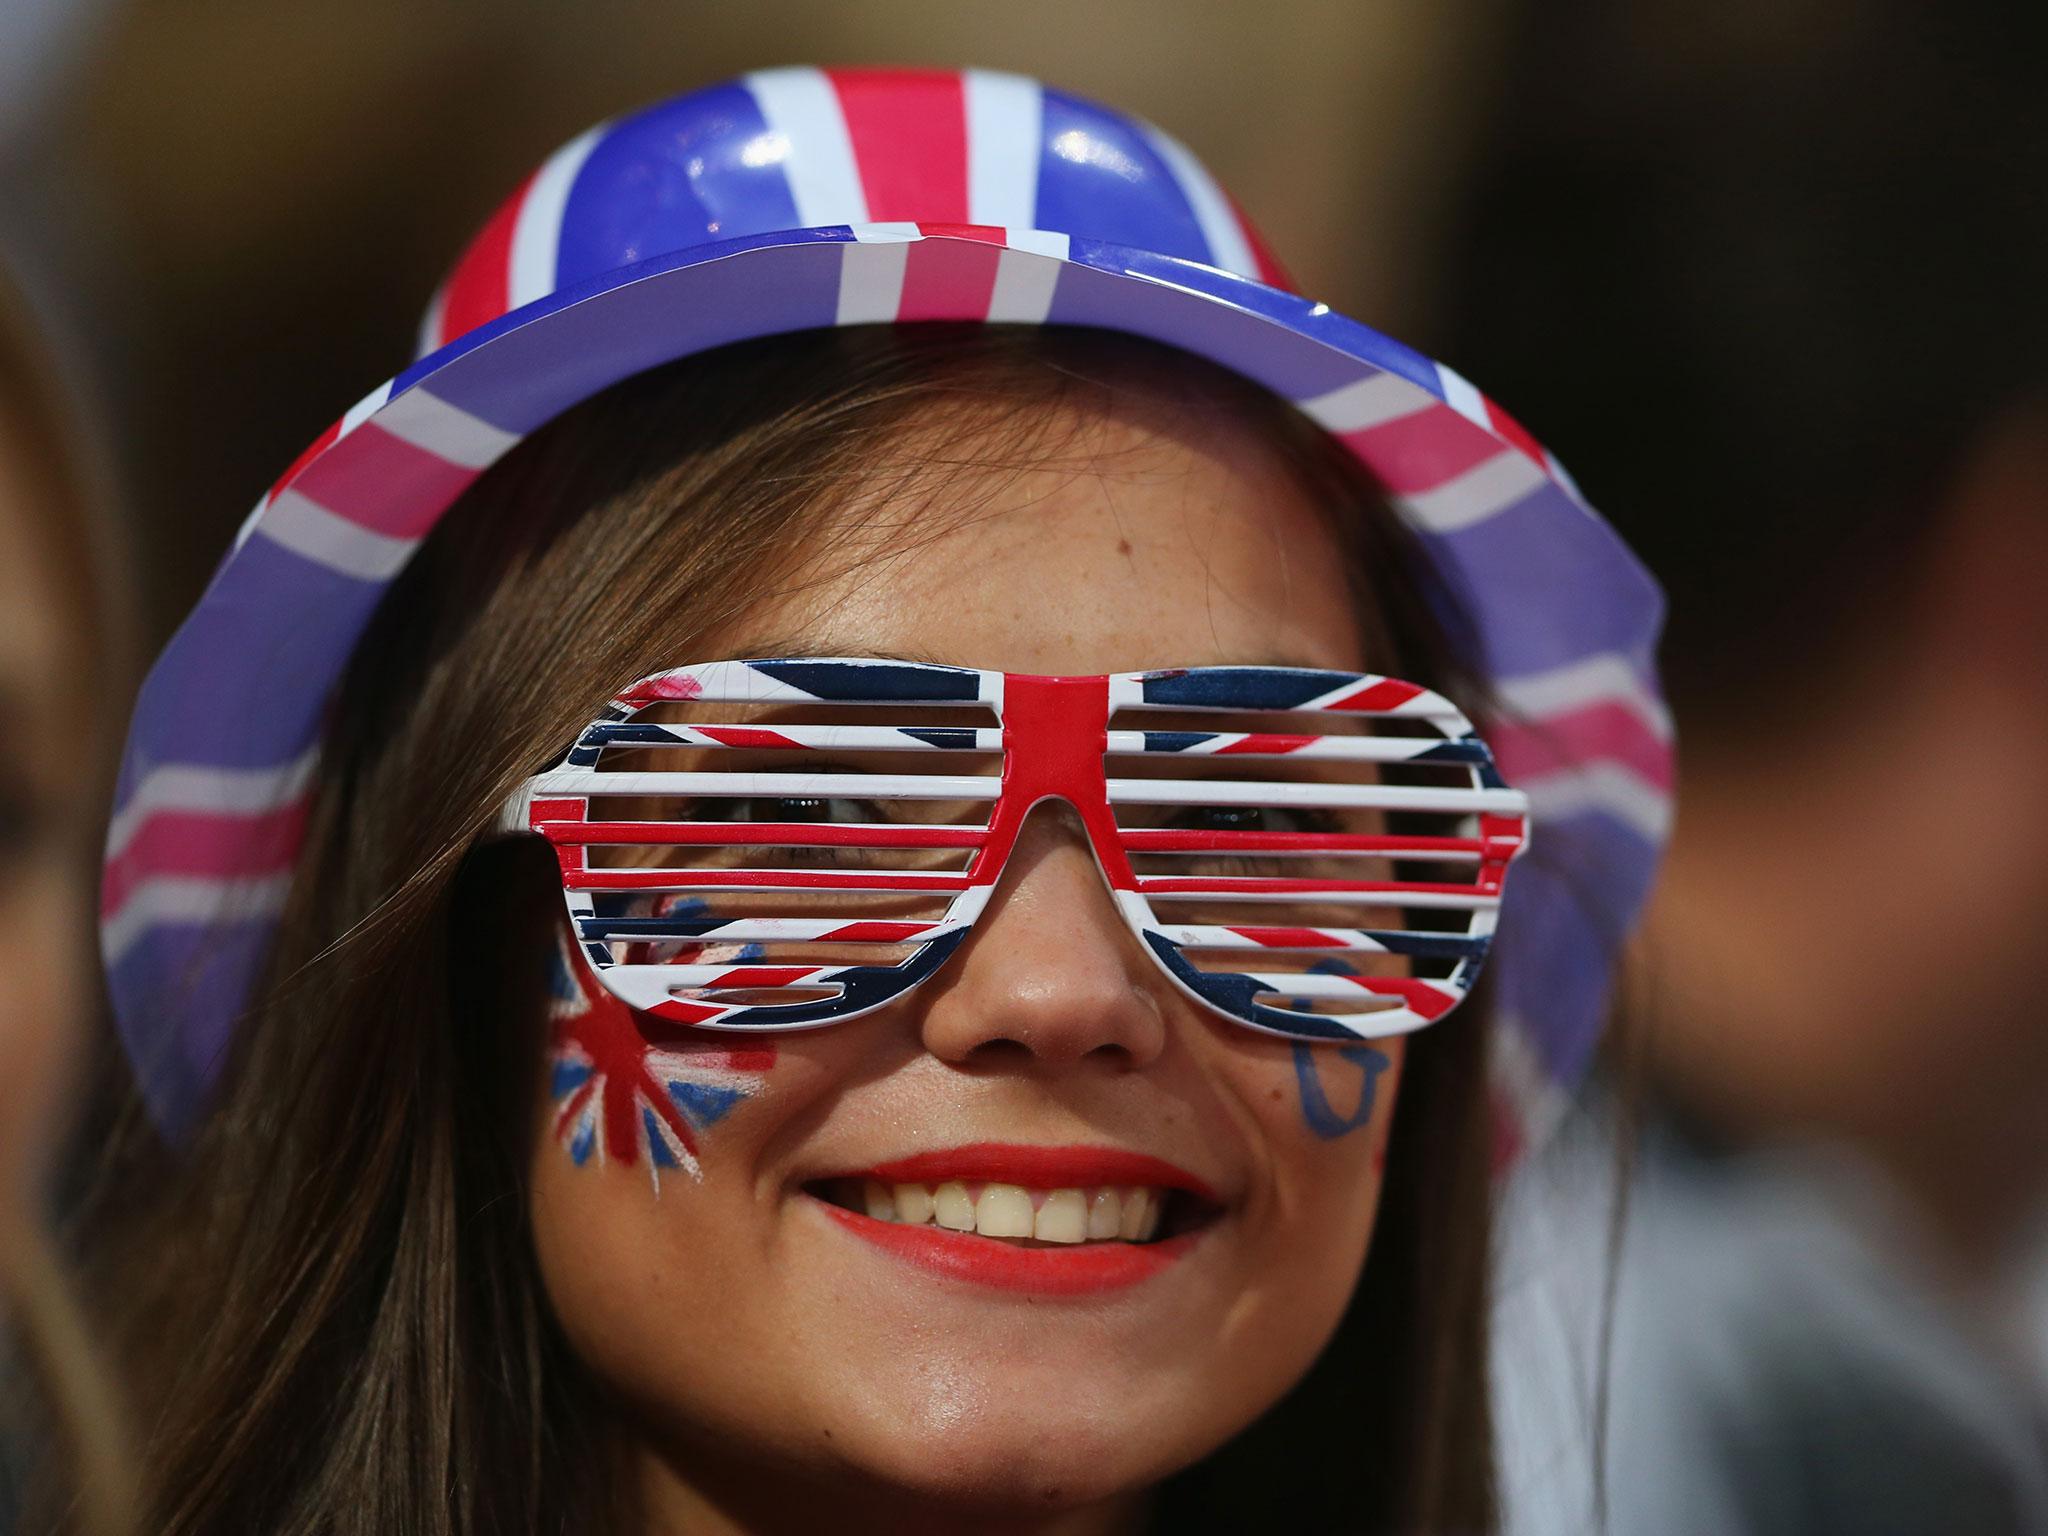 A spectator wears Union flag glasses on day 4 of the London 2012 Paralympic Games at Olympic Stadium on September 2, 2012 in London, England